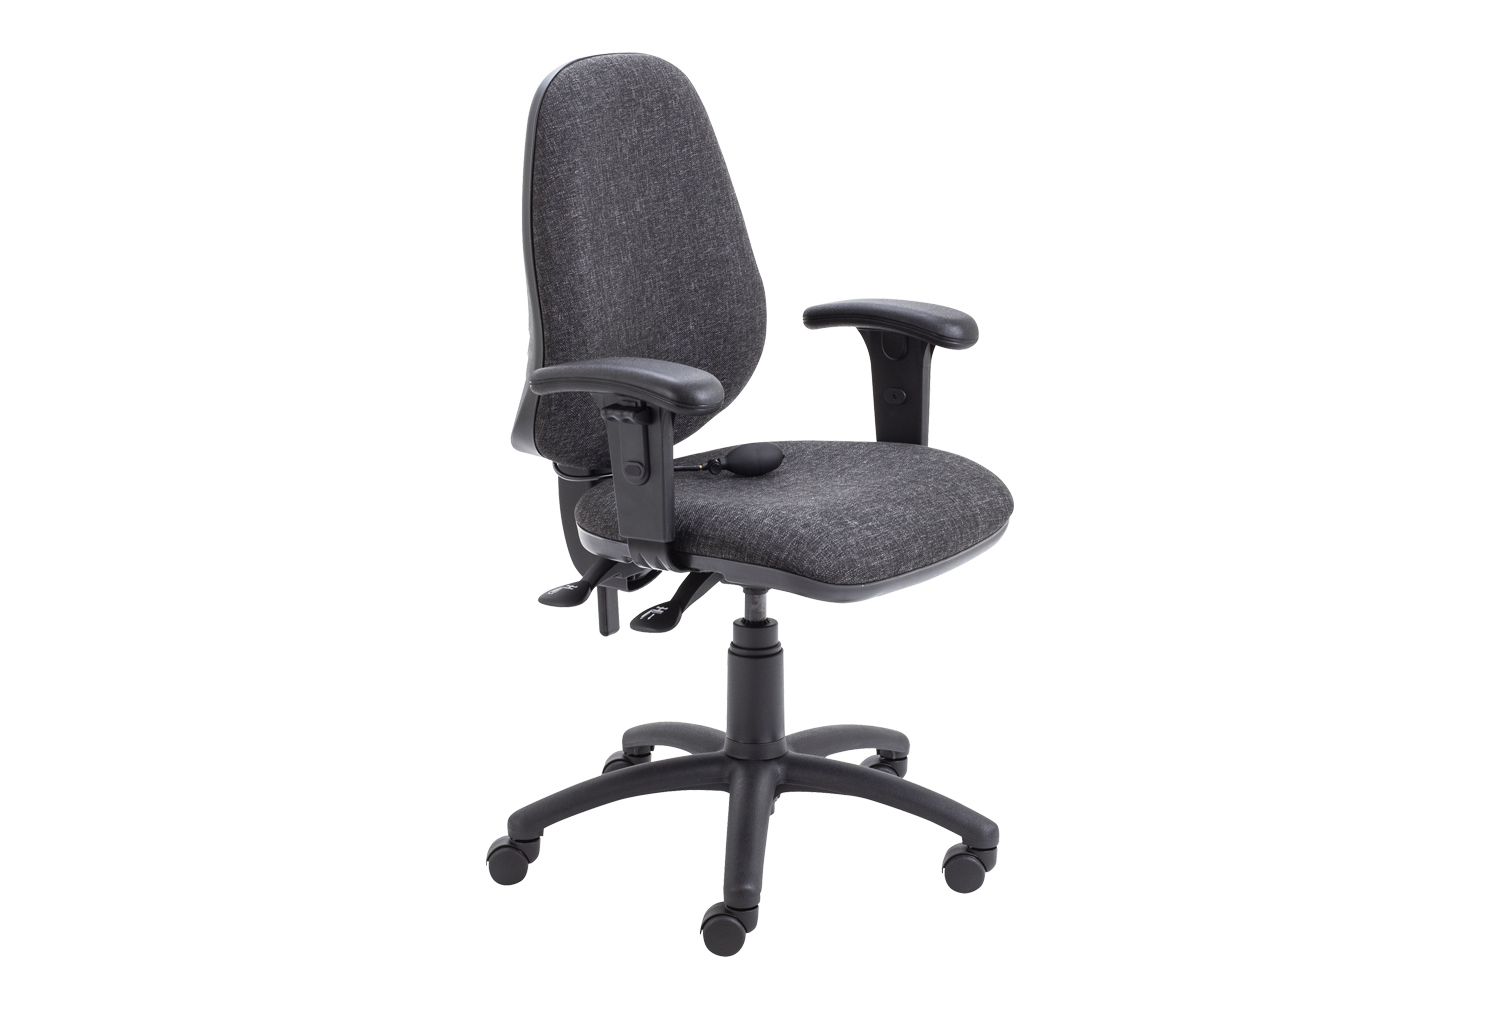 Orchid Lumbar Pump Ergonomic Operator Office Chair With Height Adjustable Arms, Charcoal, Fully Installed